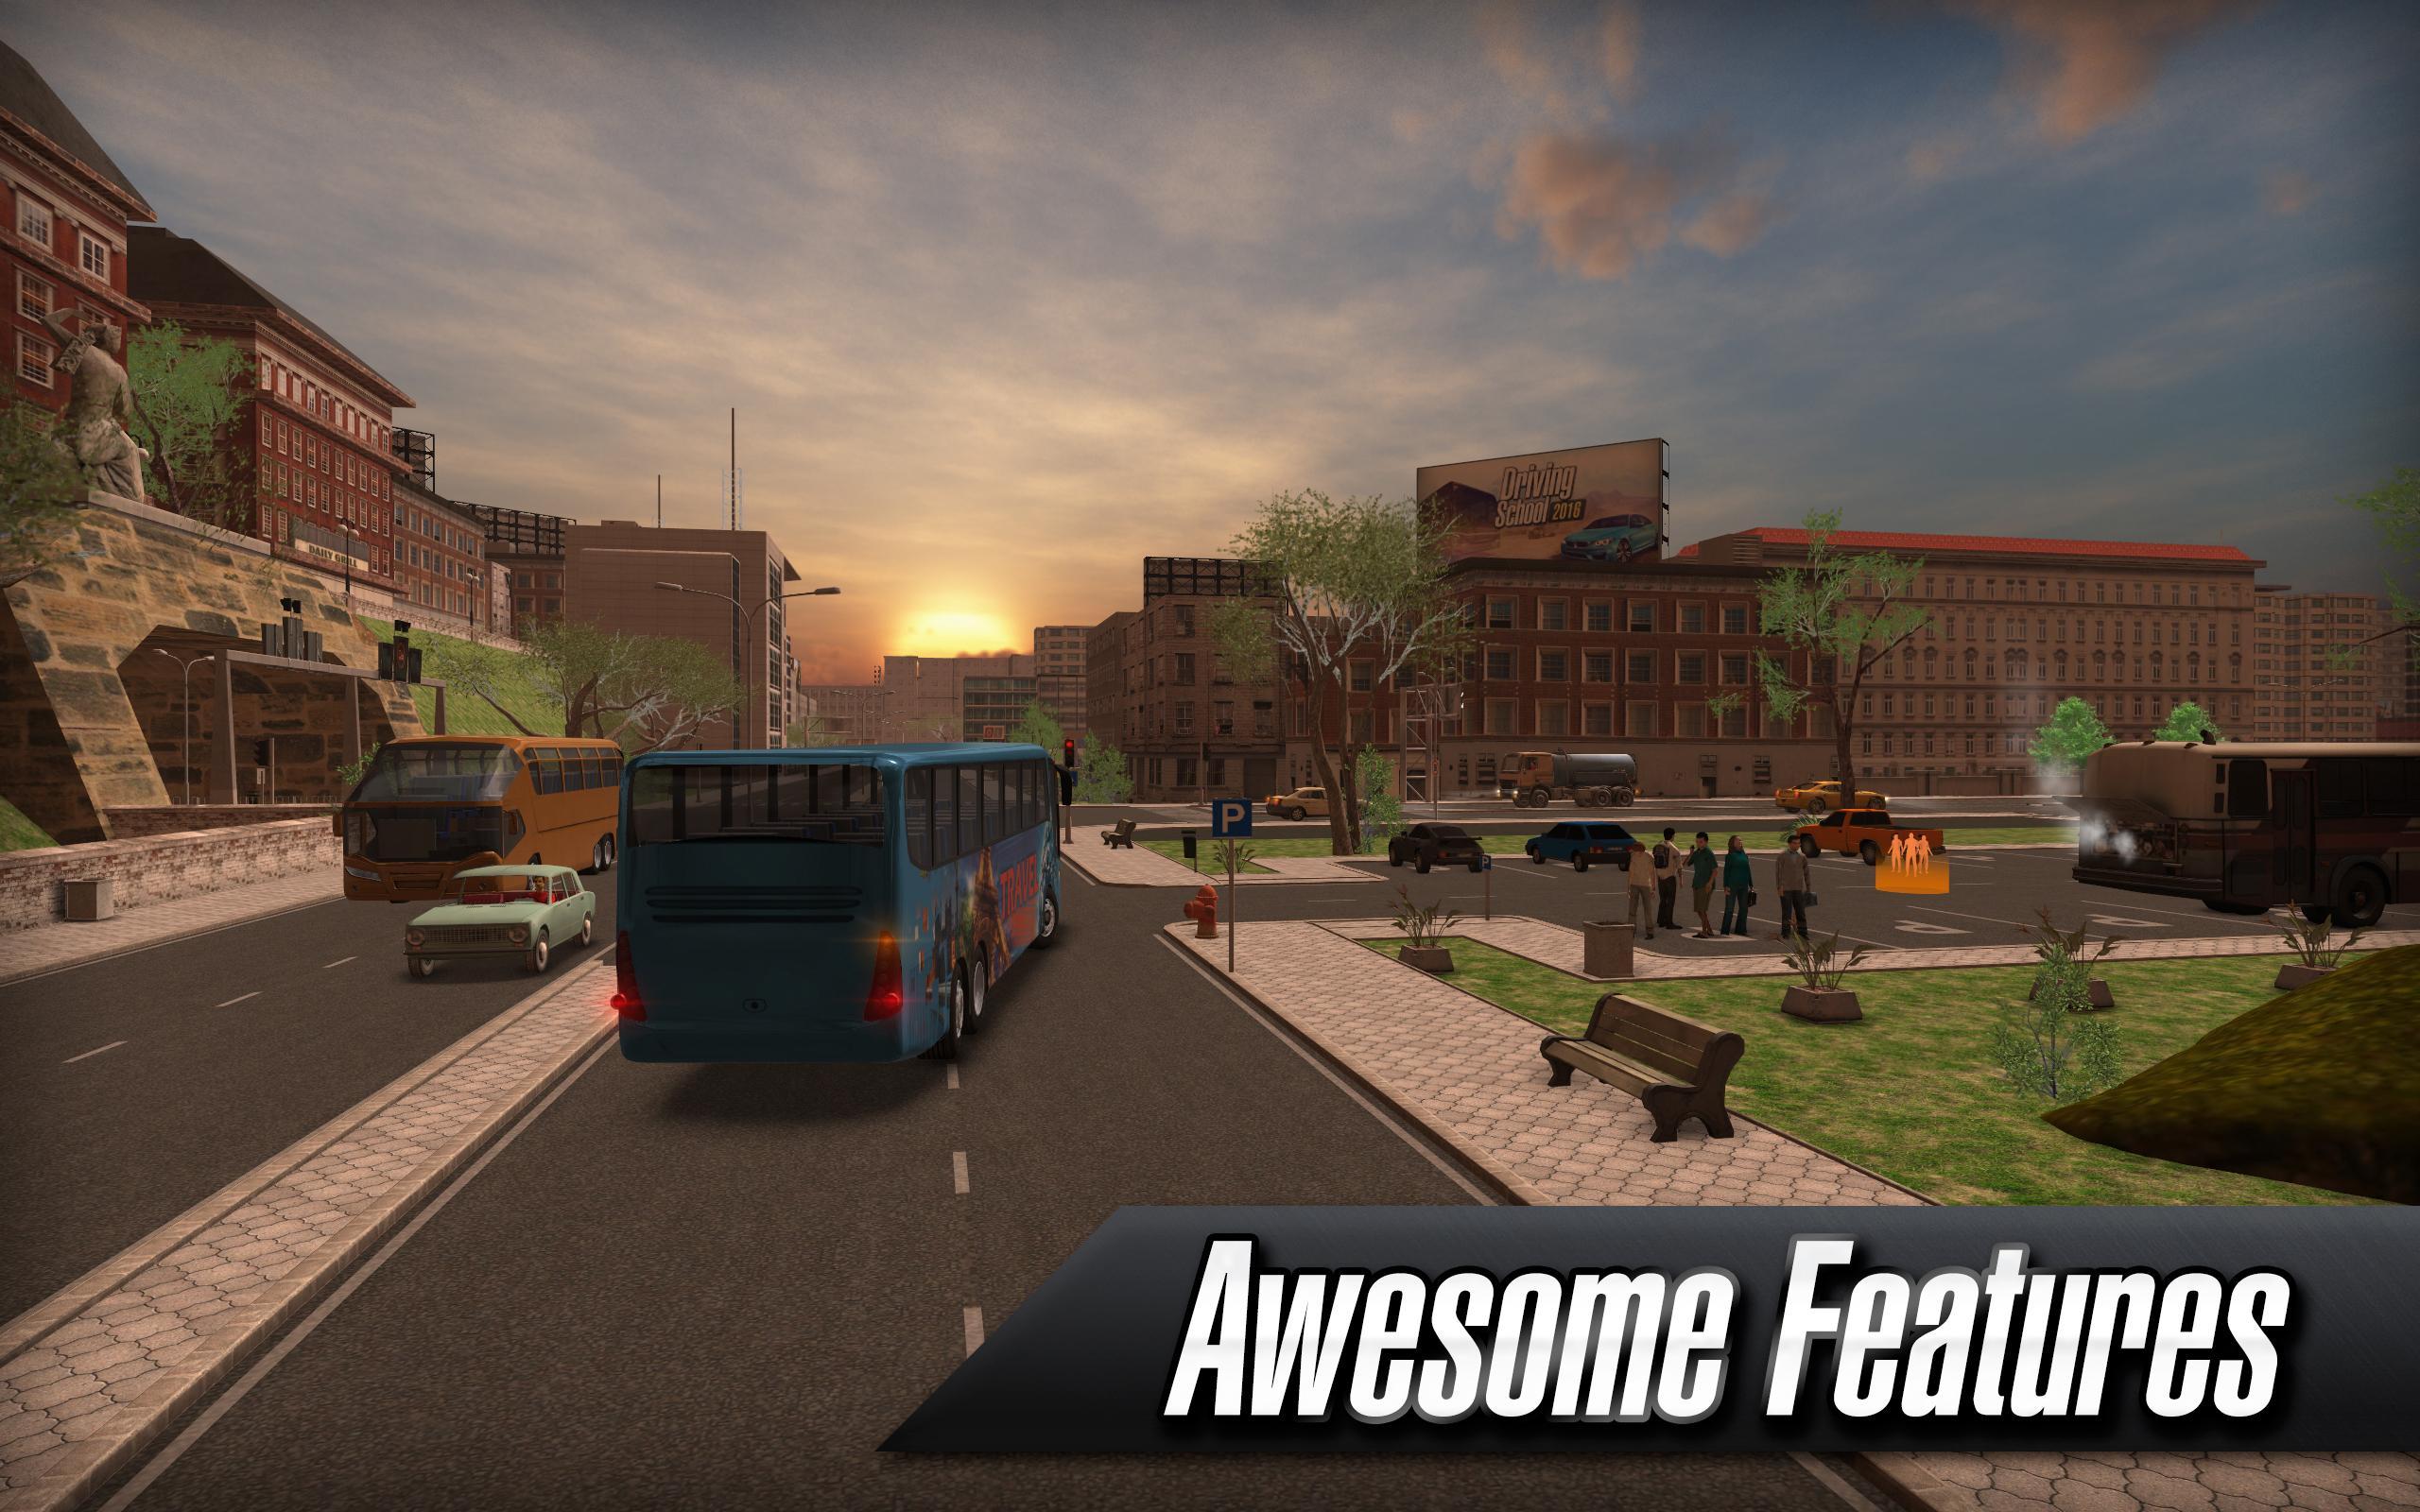 Coach Bus Simulator for Android - APK Download